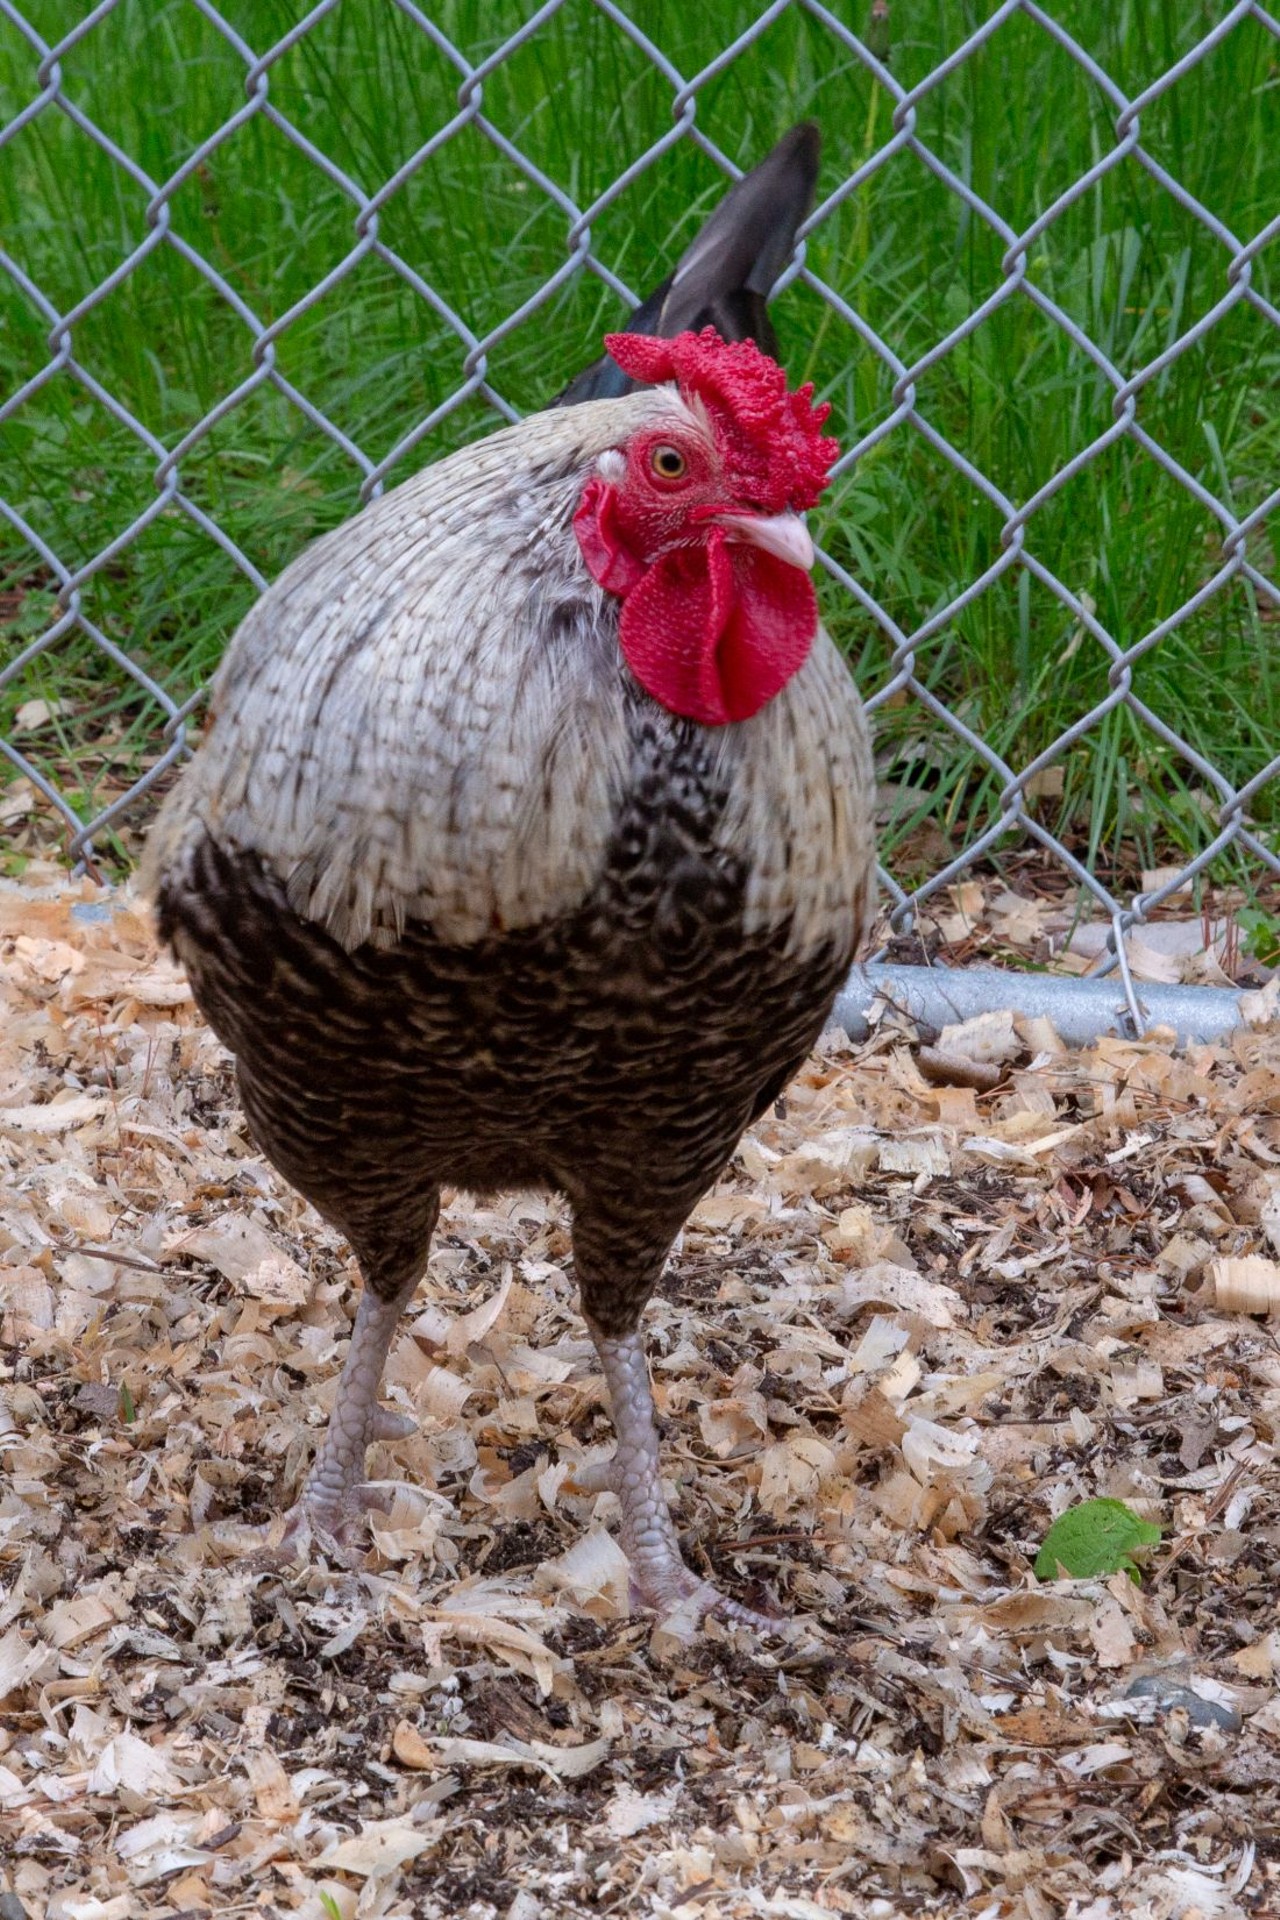 NAME: Harold
GENDER: Male
BREED: Chicken
AGE: 1 year, 1 month
SPECIAL CONSIDERATIONS: None
REASON I CAME TO MHS: Rescued in Detroit
LOCATION: Rochester Hills Center for Animal Care
ID NUMBER: 868407